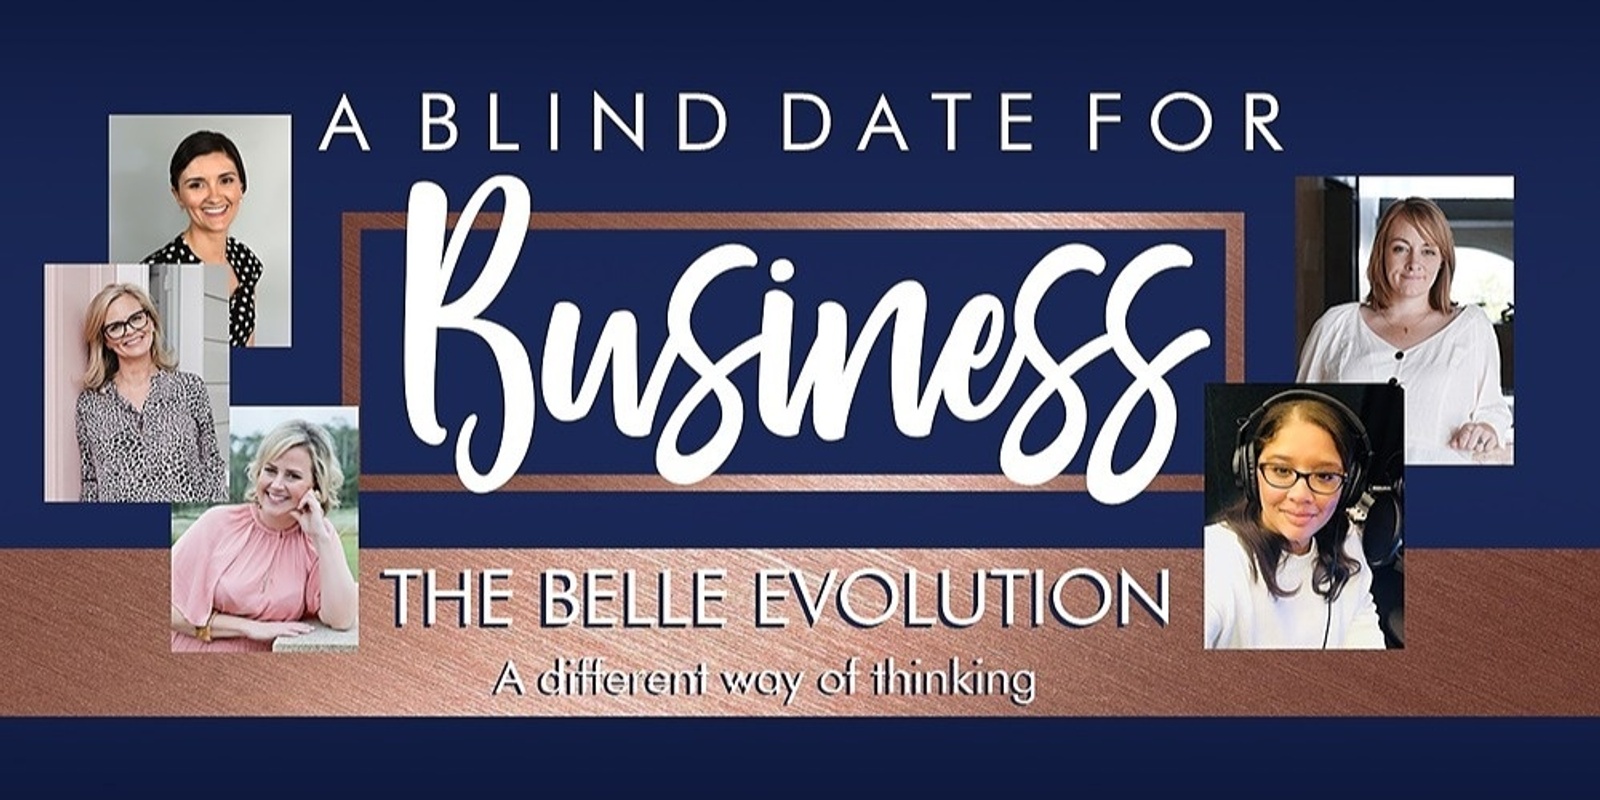 Banner image for A Blind Date For Business - Introducing The Belle Evolution - A different way of thinking